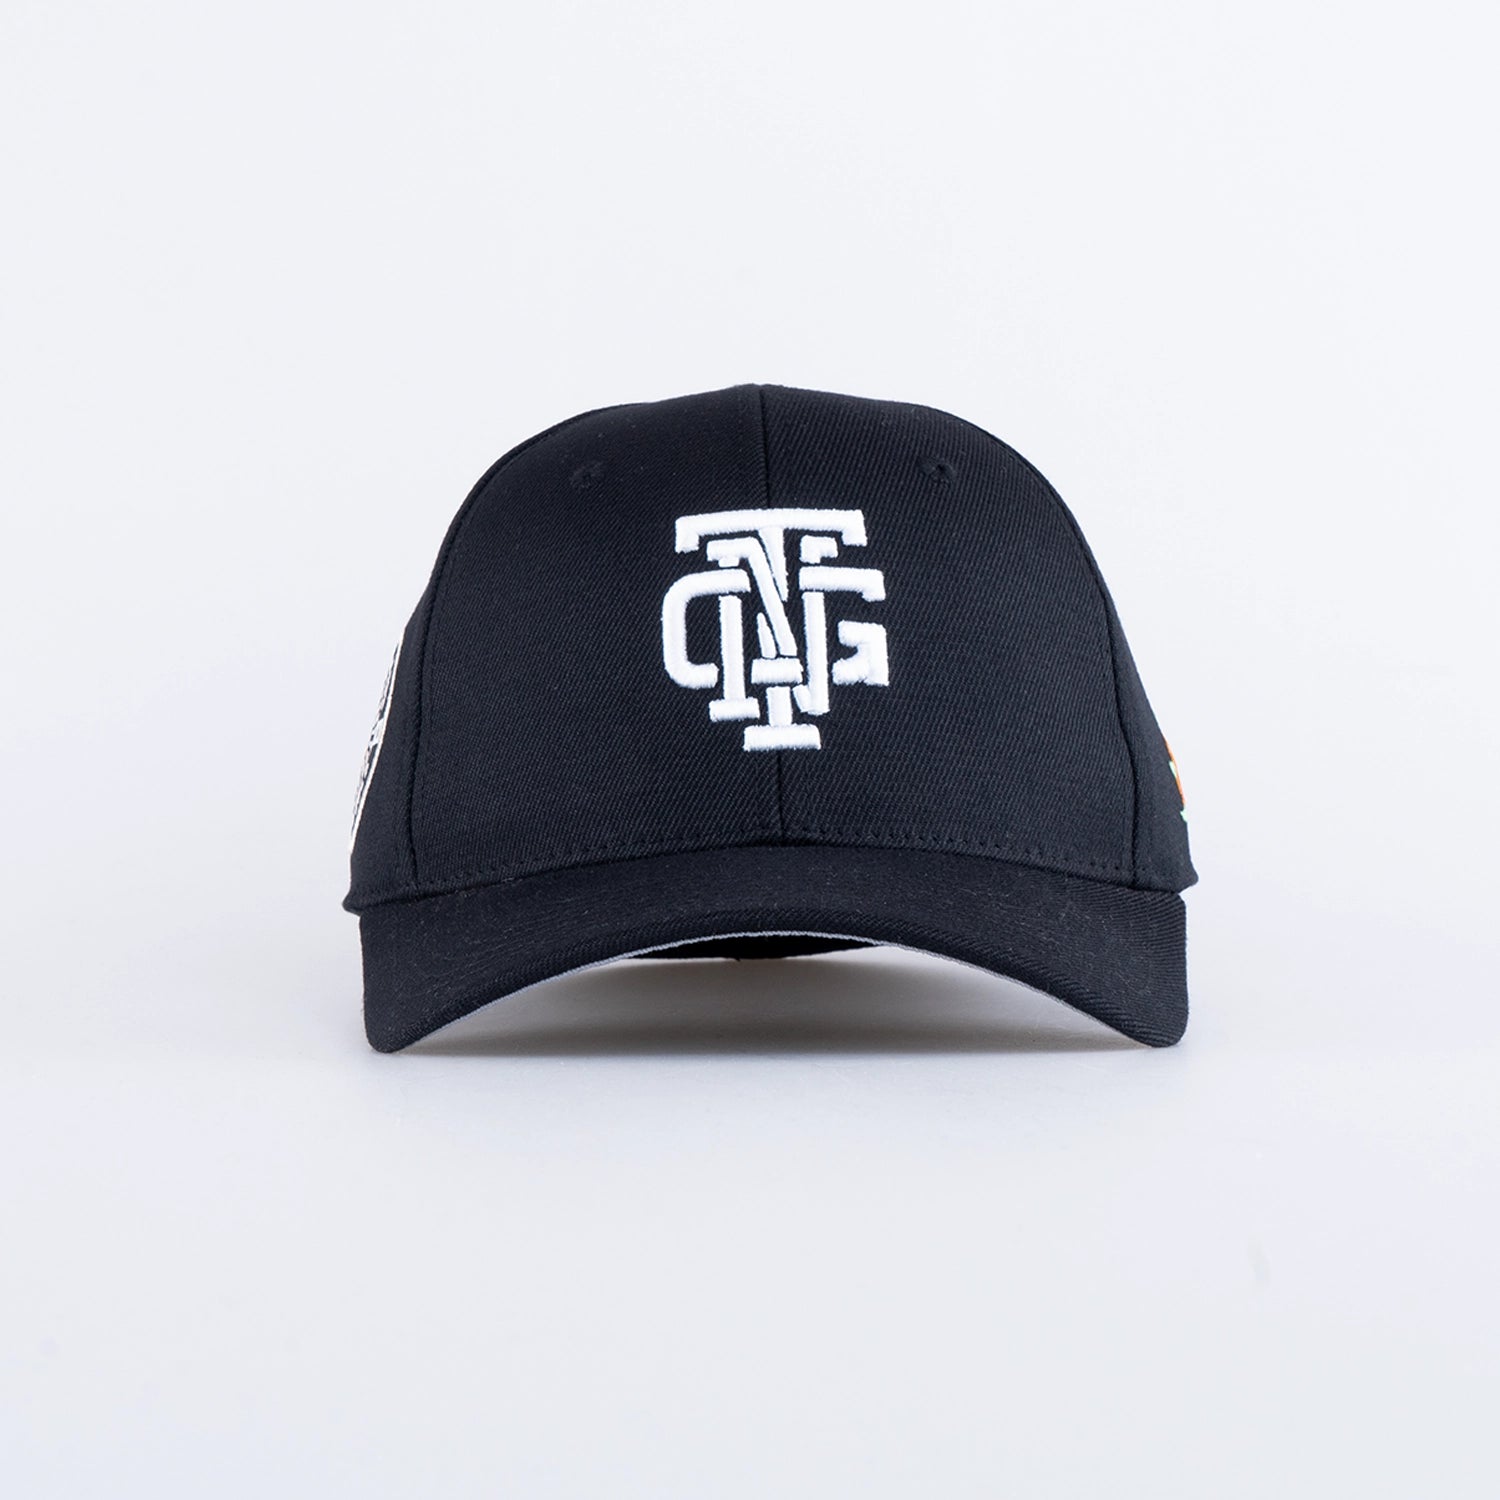 SYMBOL FITTED KEPS - HOOKED BLACK